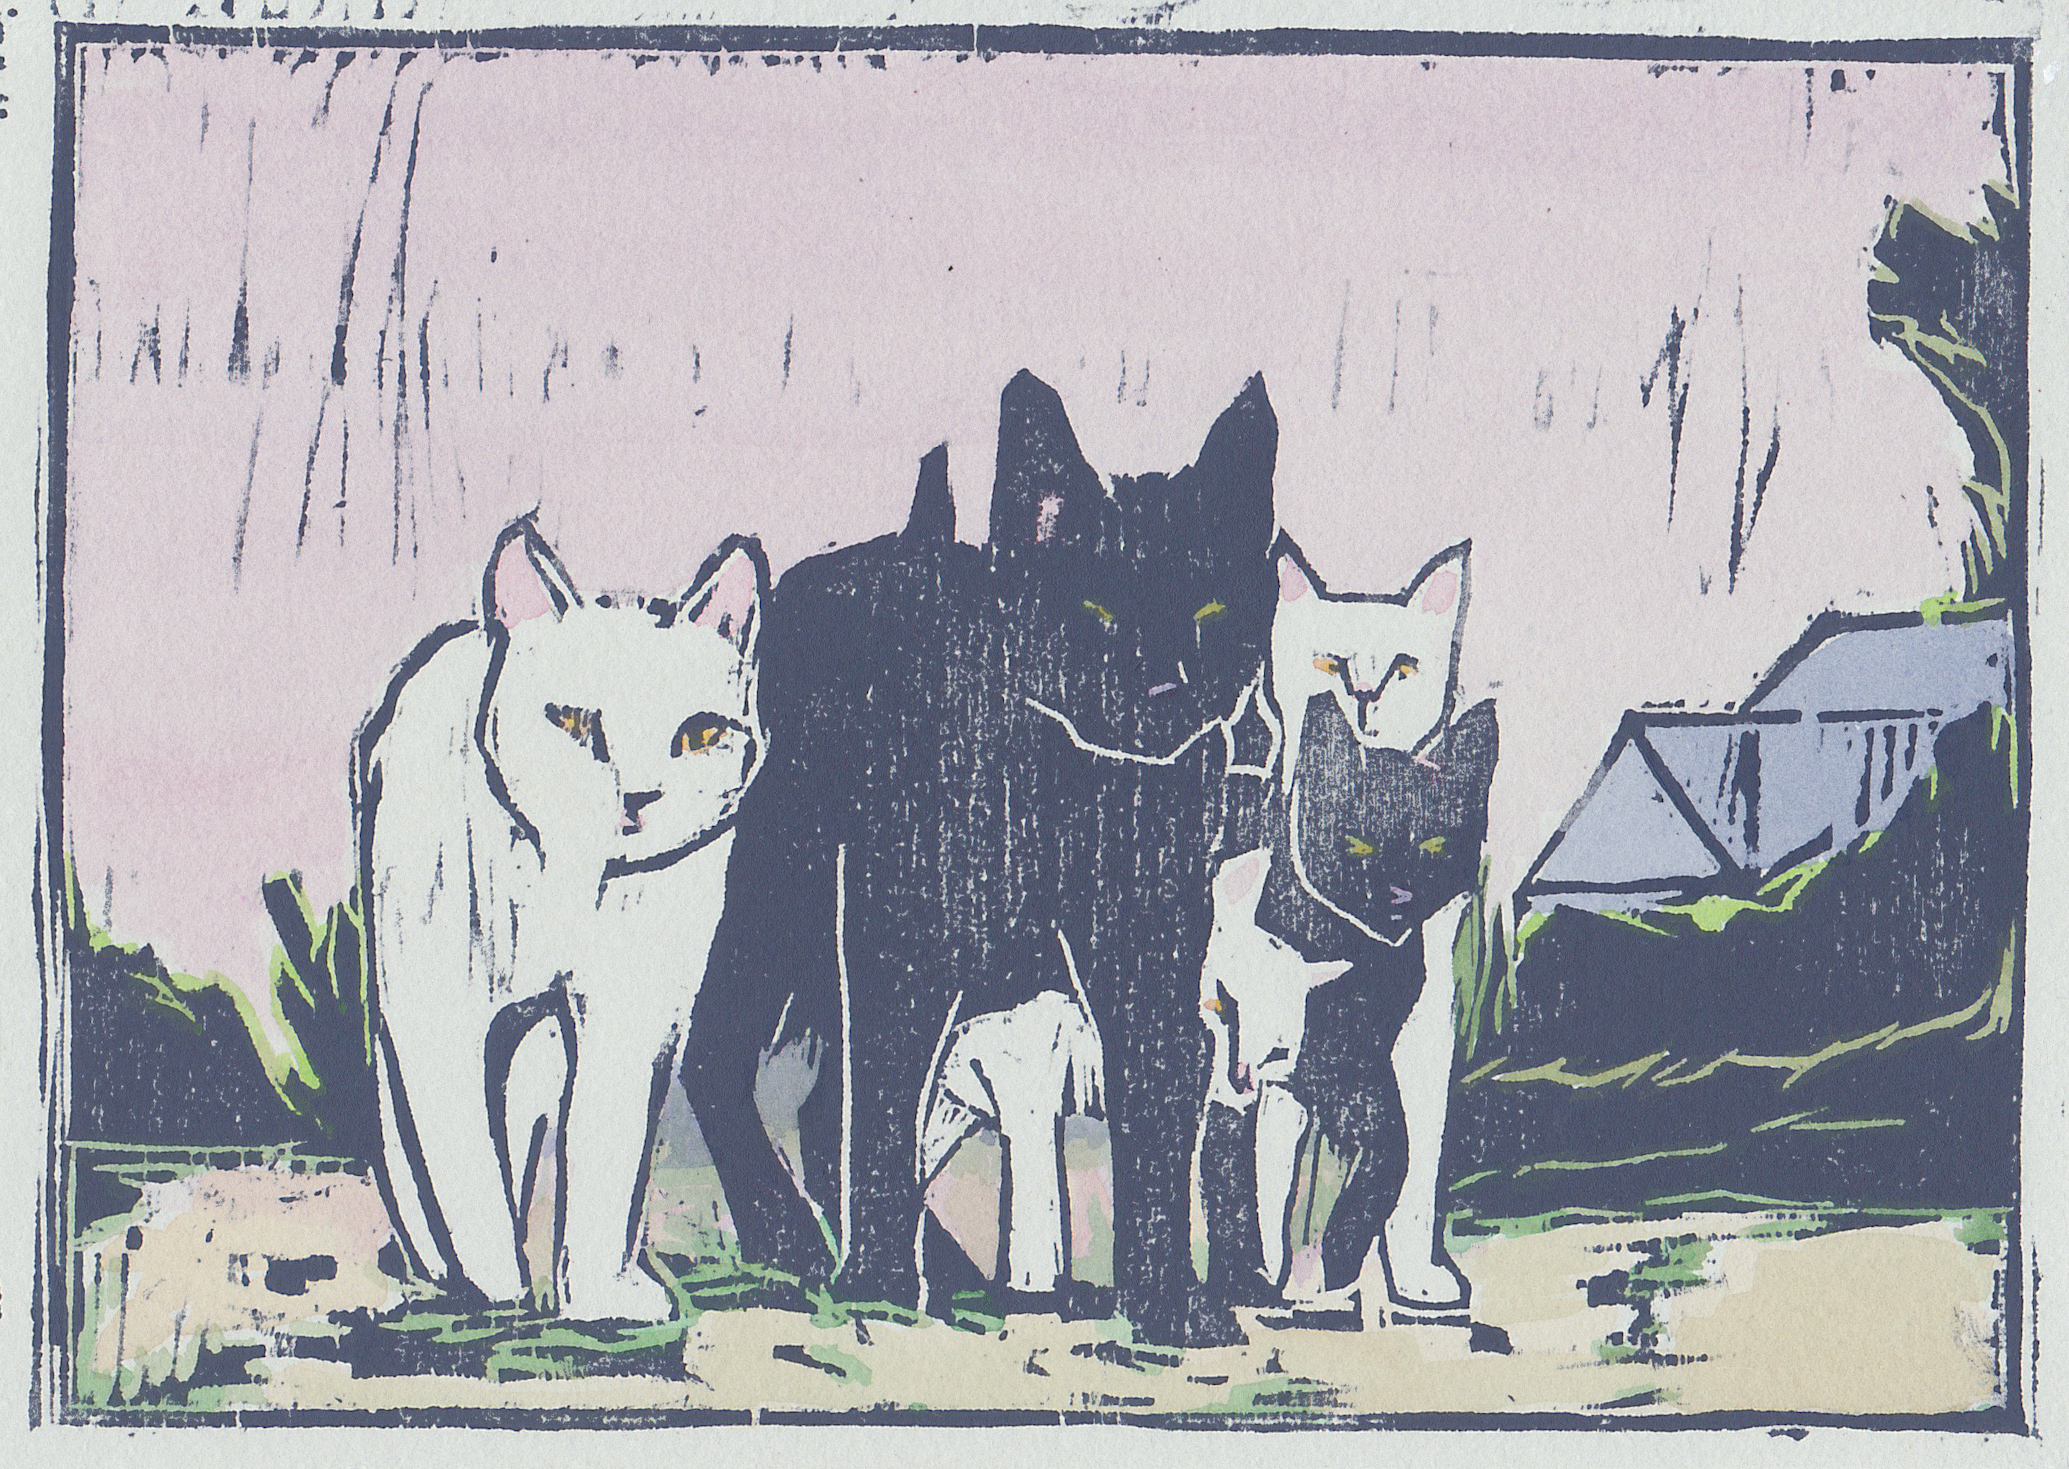   alley cats  woodblock print with hand-coloring 5x7" 2019   purchase  